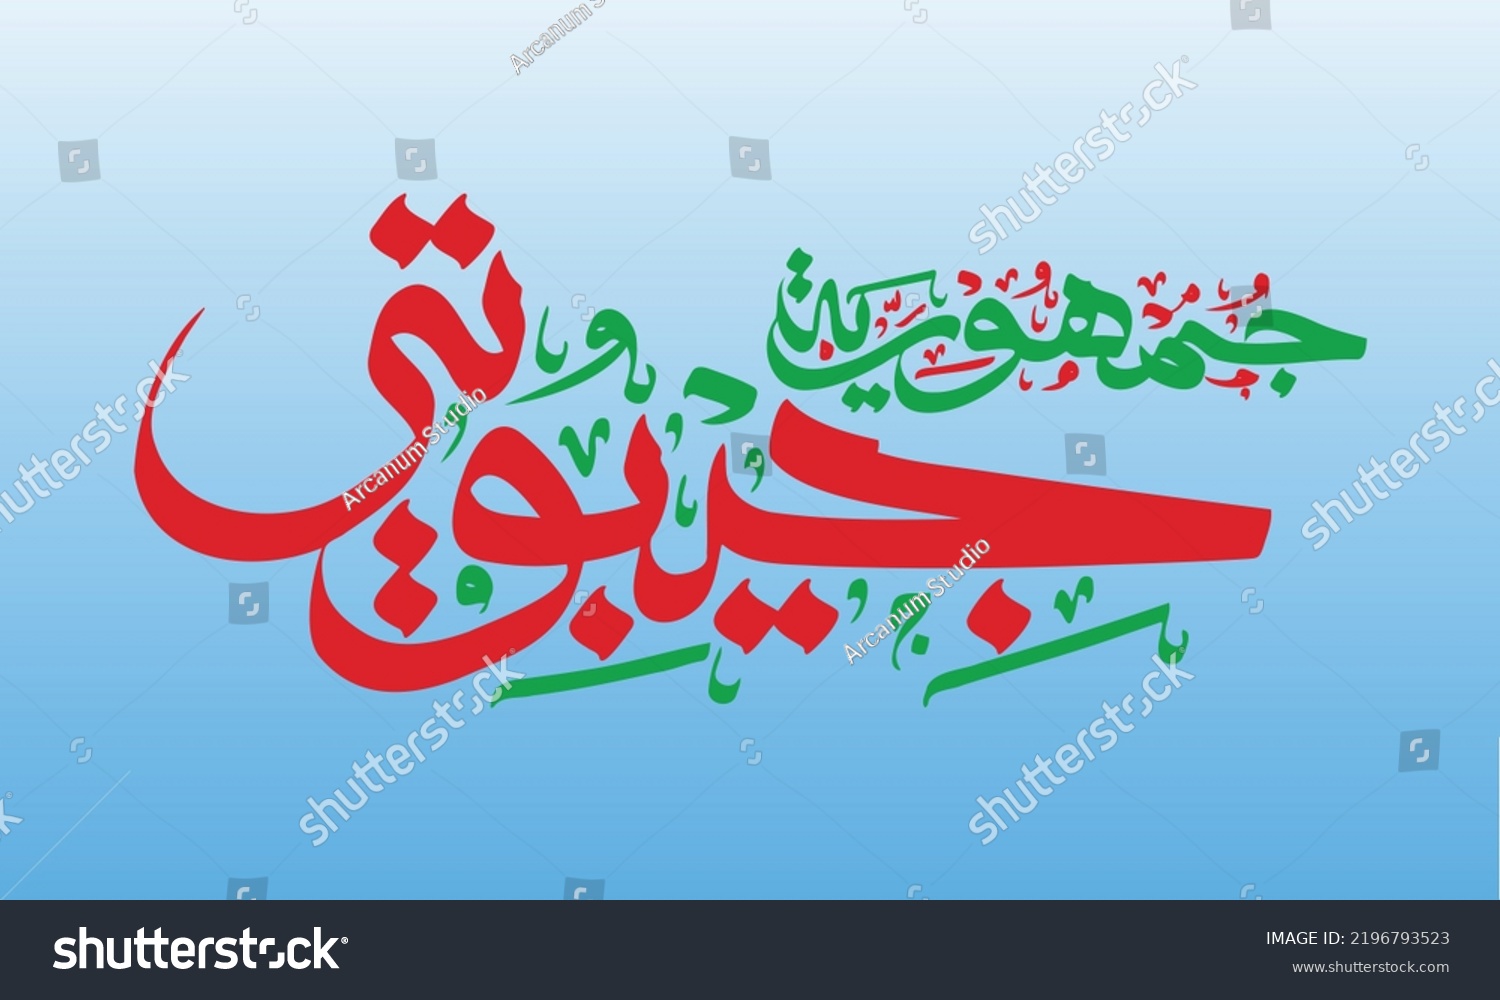 SVG of Vector Illustration of Djibouti in Arabic Calligraphy Suitable for National Holiday or Decorative Background. Arabic Text is Republic of Djibouti in English. svg